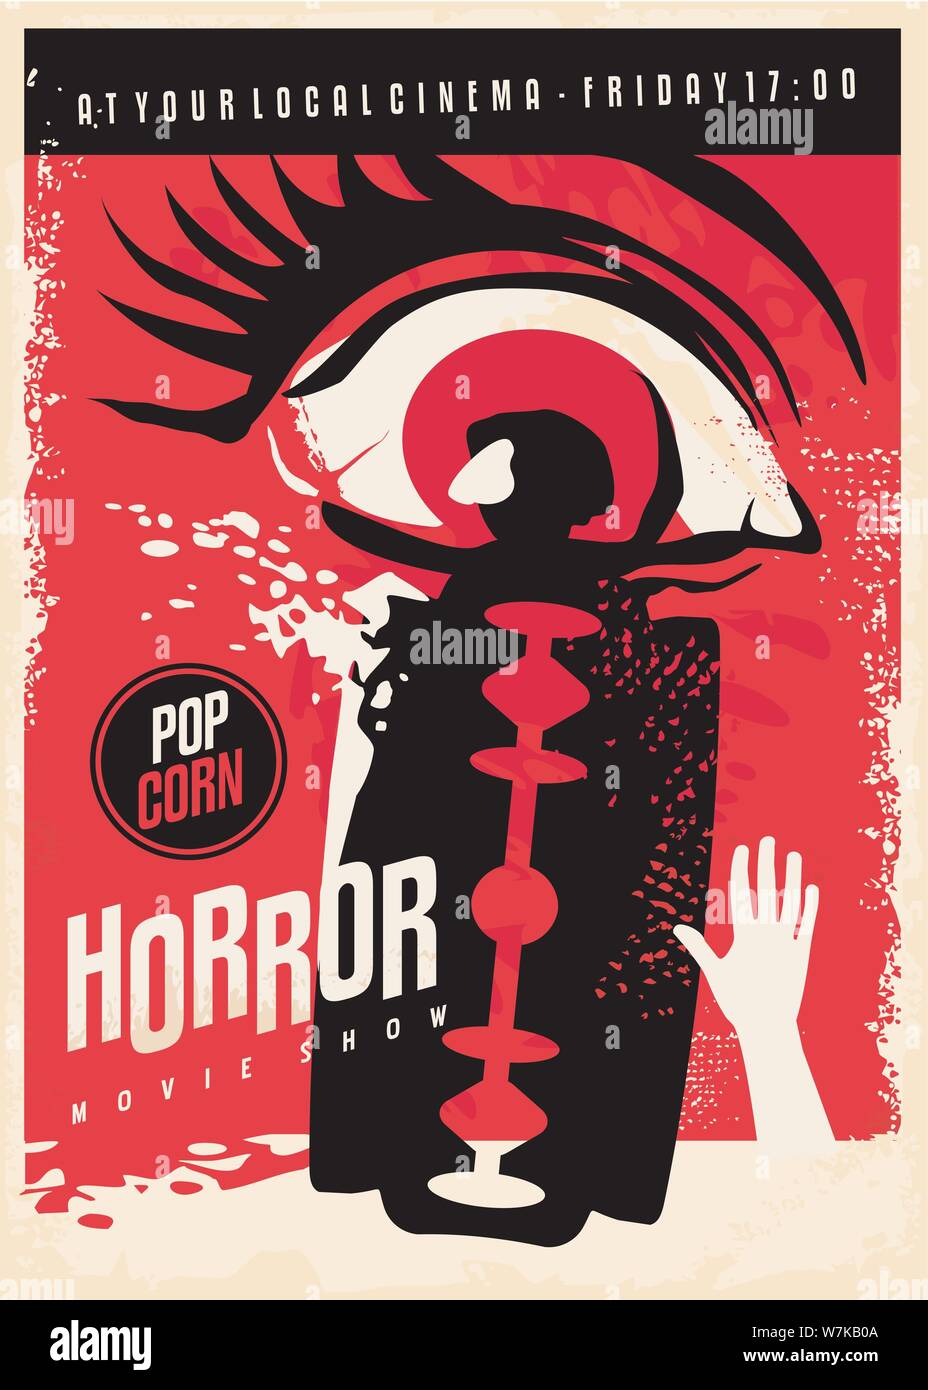 horror movies poster